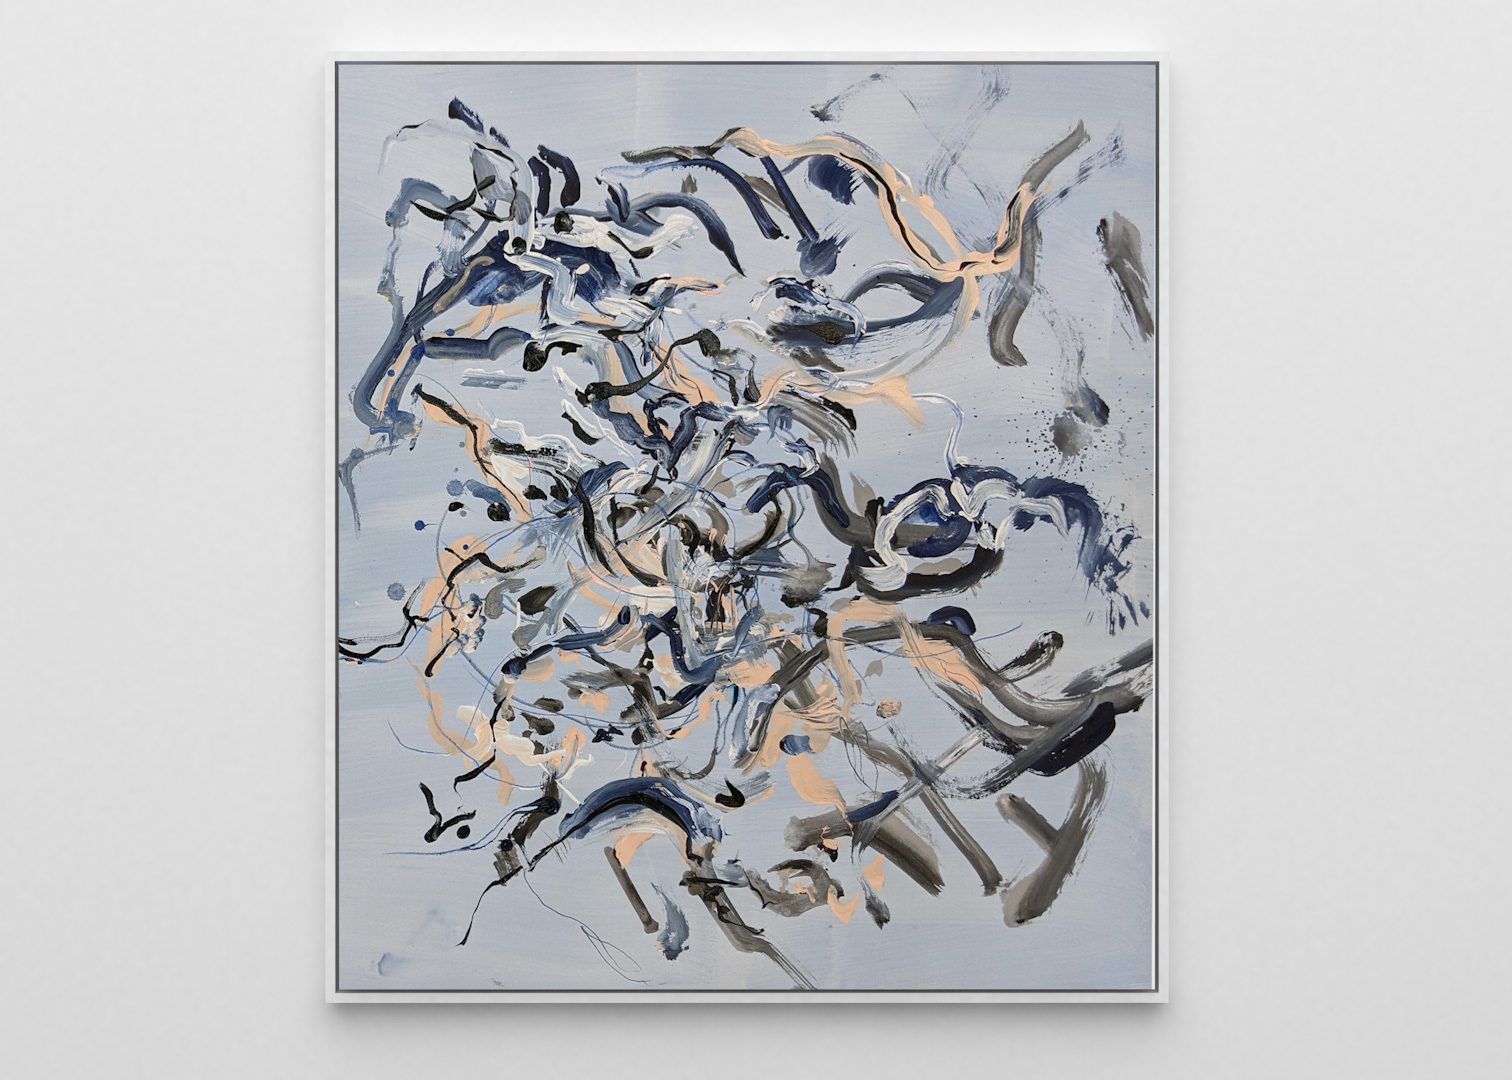 a photo of an abstract painting - Pollock-style drips in black, white, and beige on a pale blue background